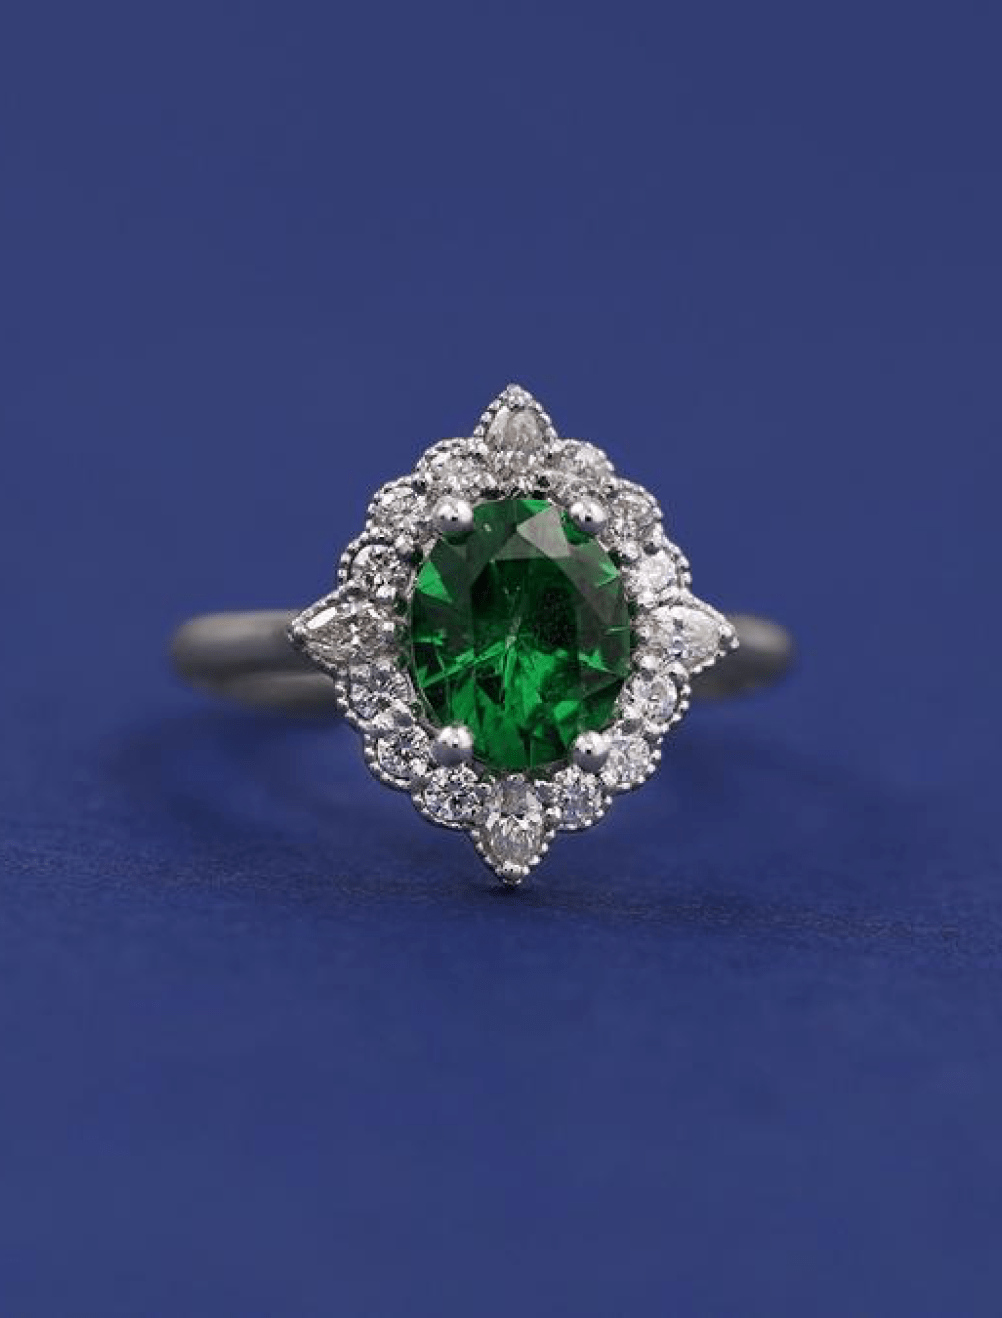 A custom engagement ring made from platinum featuring an oval tsavorite garnet surrounded by a milgrain set diamond halo